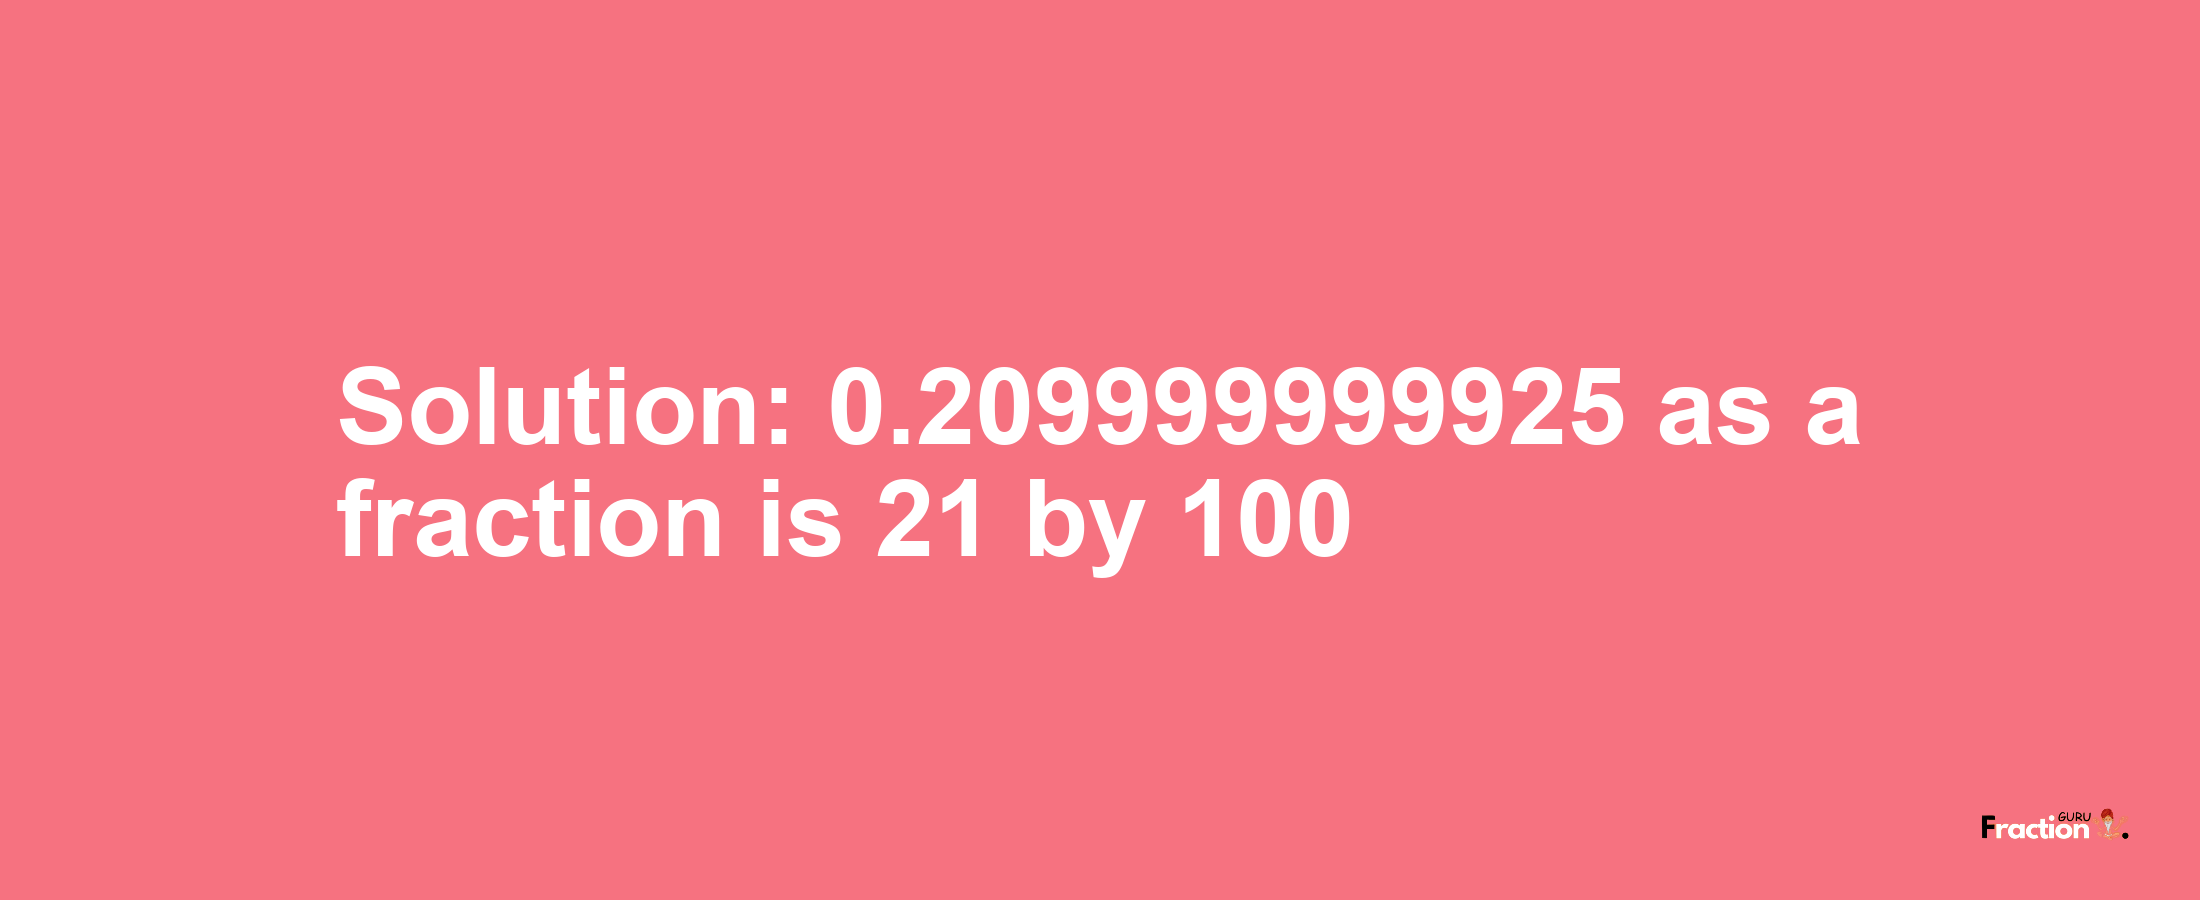 Solution:0.209999999925 as a fraction is 21/100